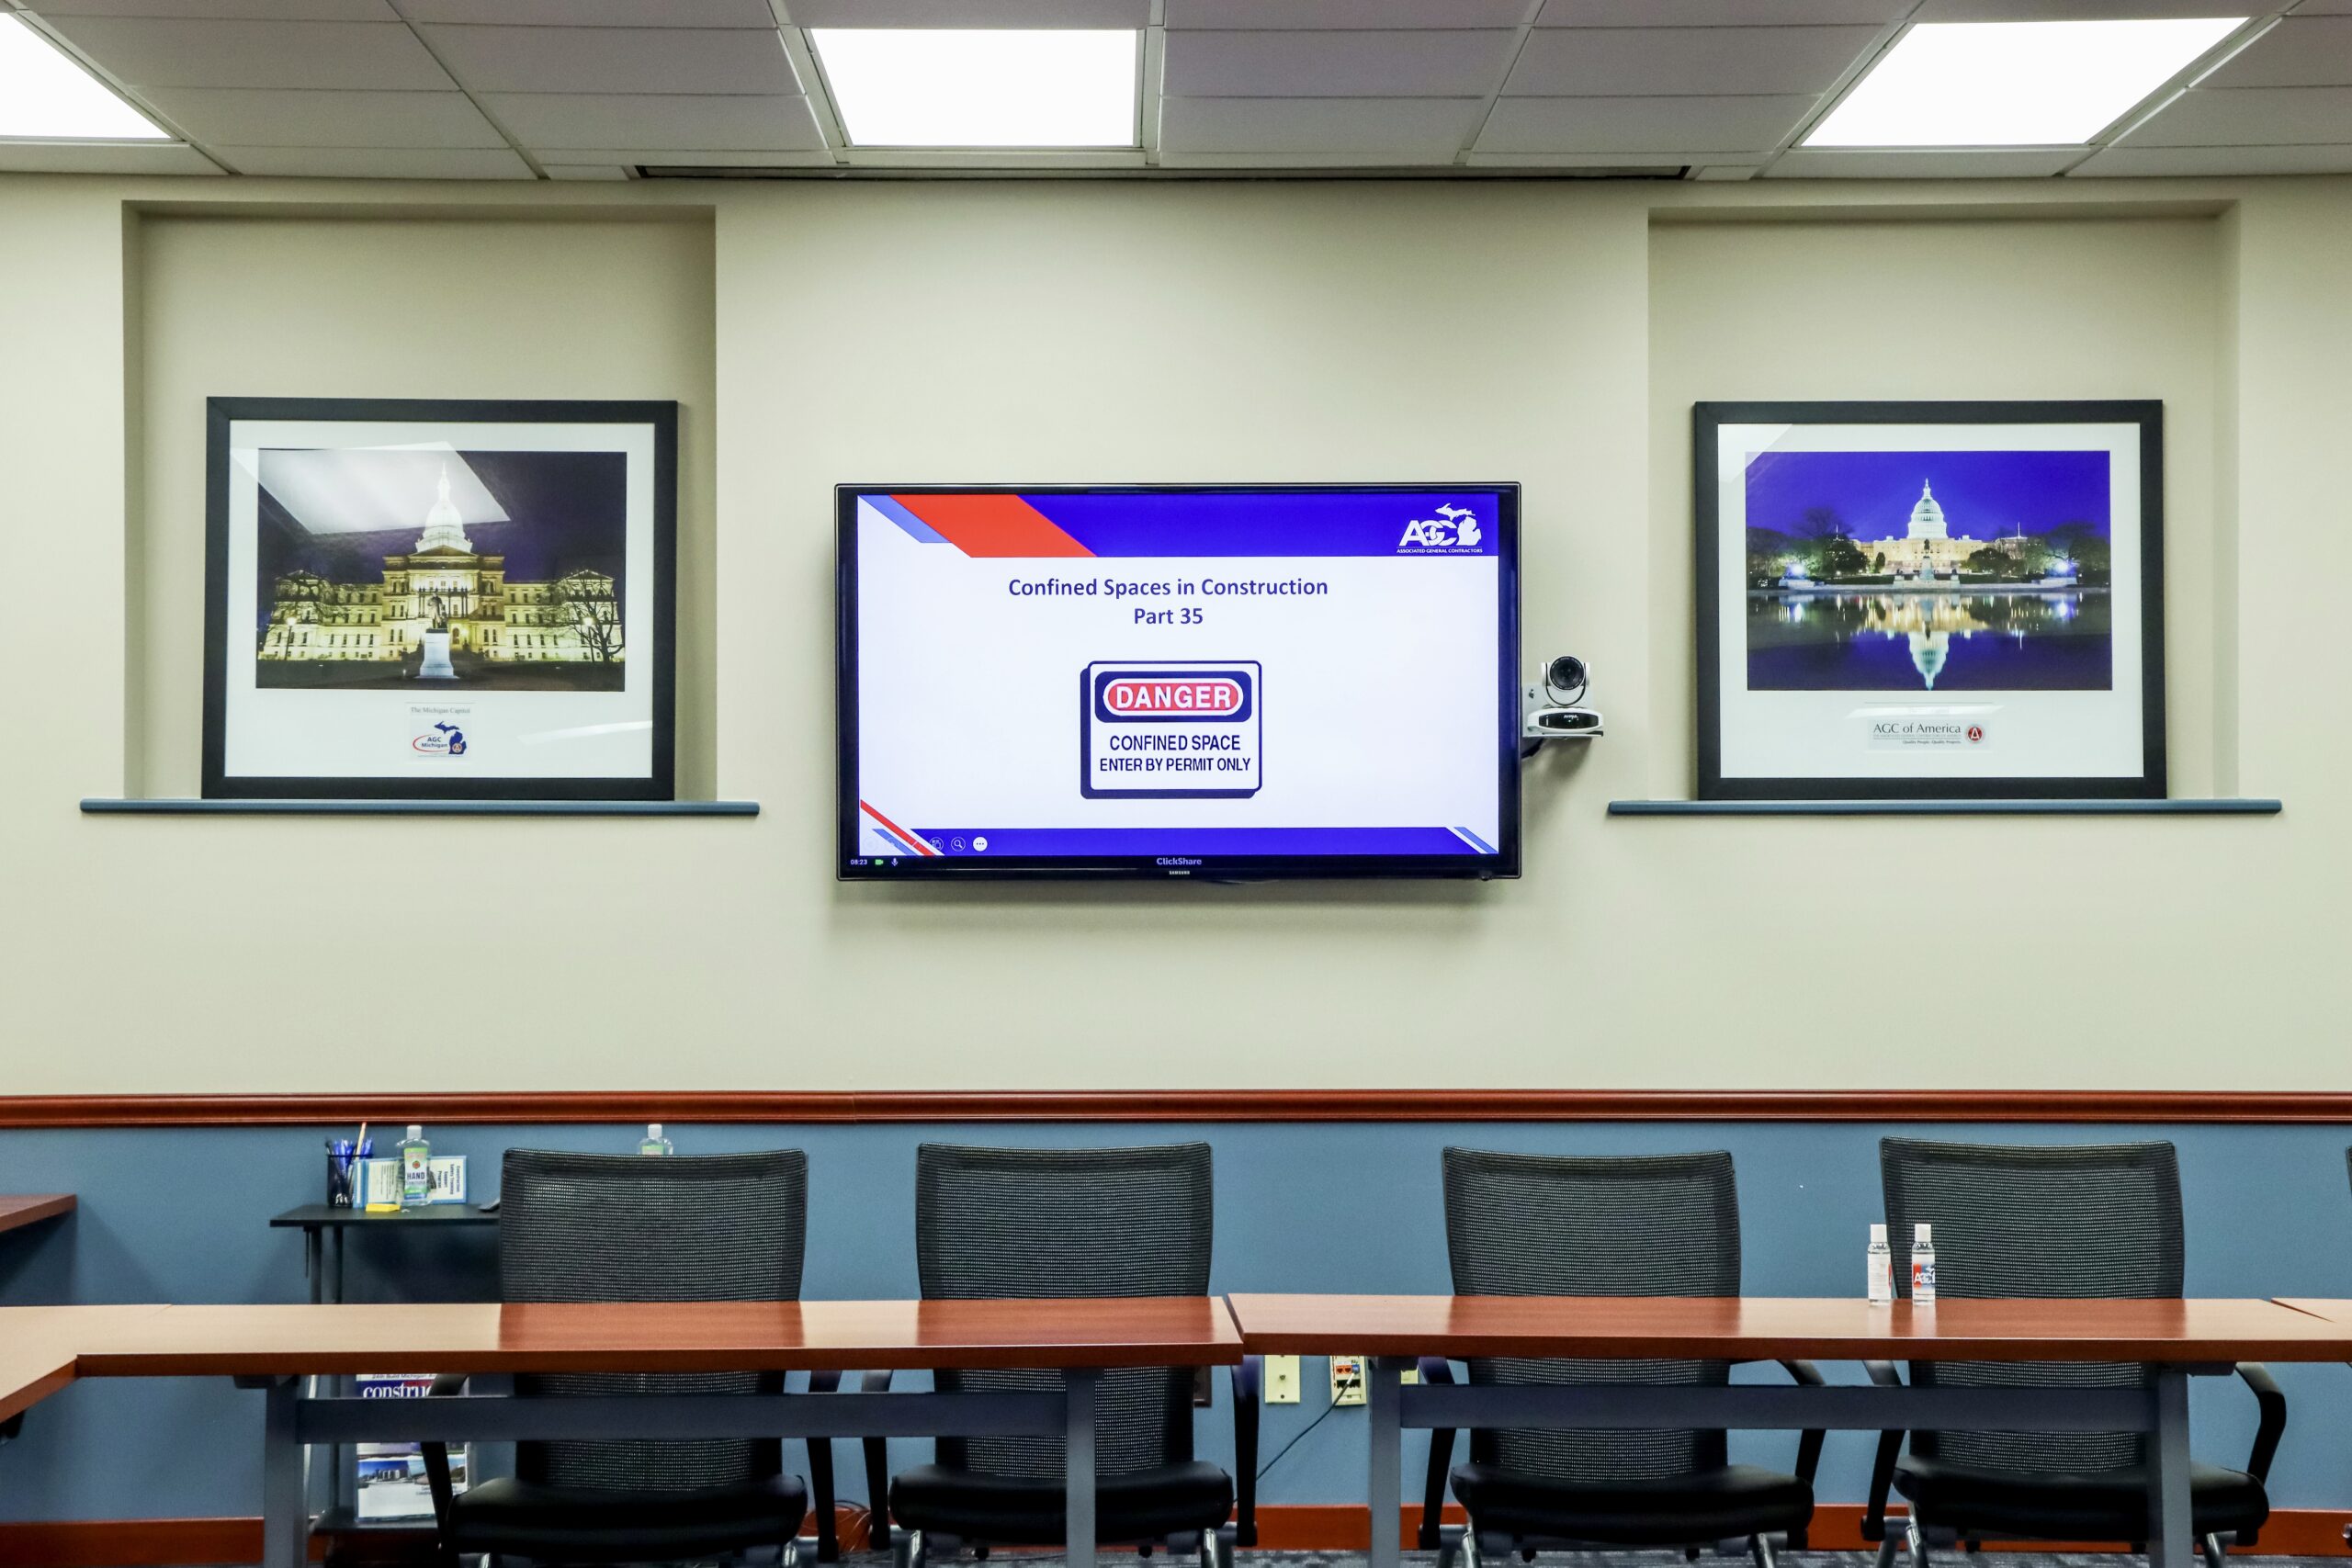 display with video conferencing equipment showing a power point presentation.